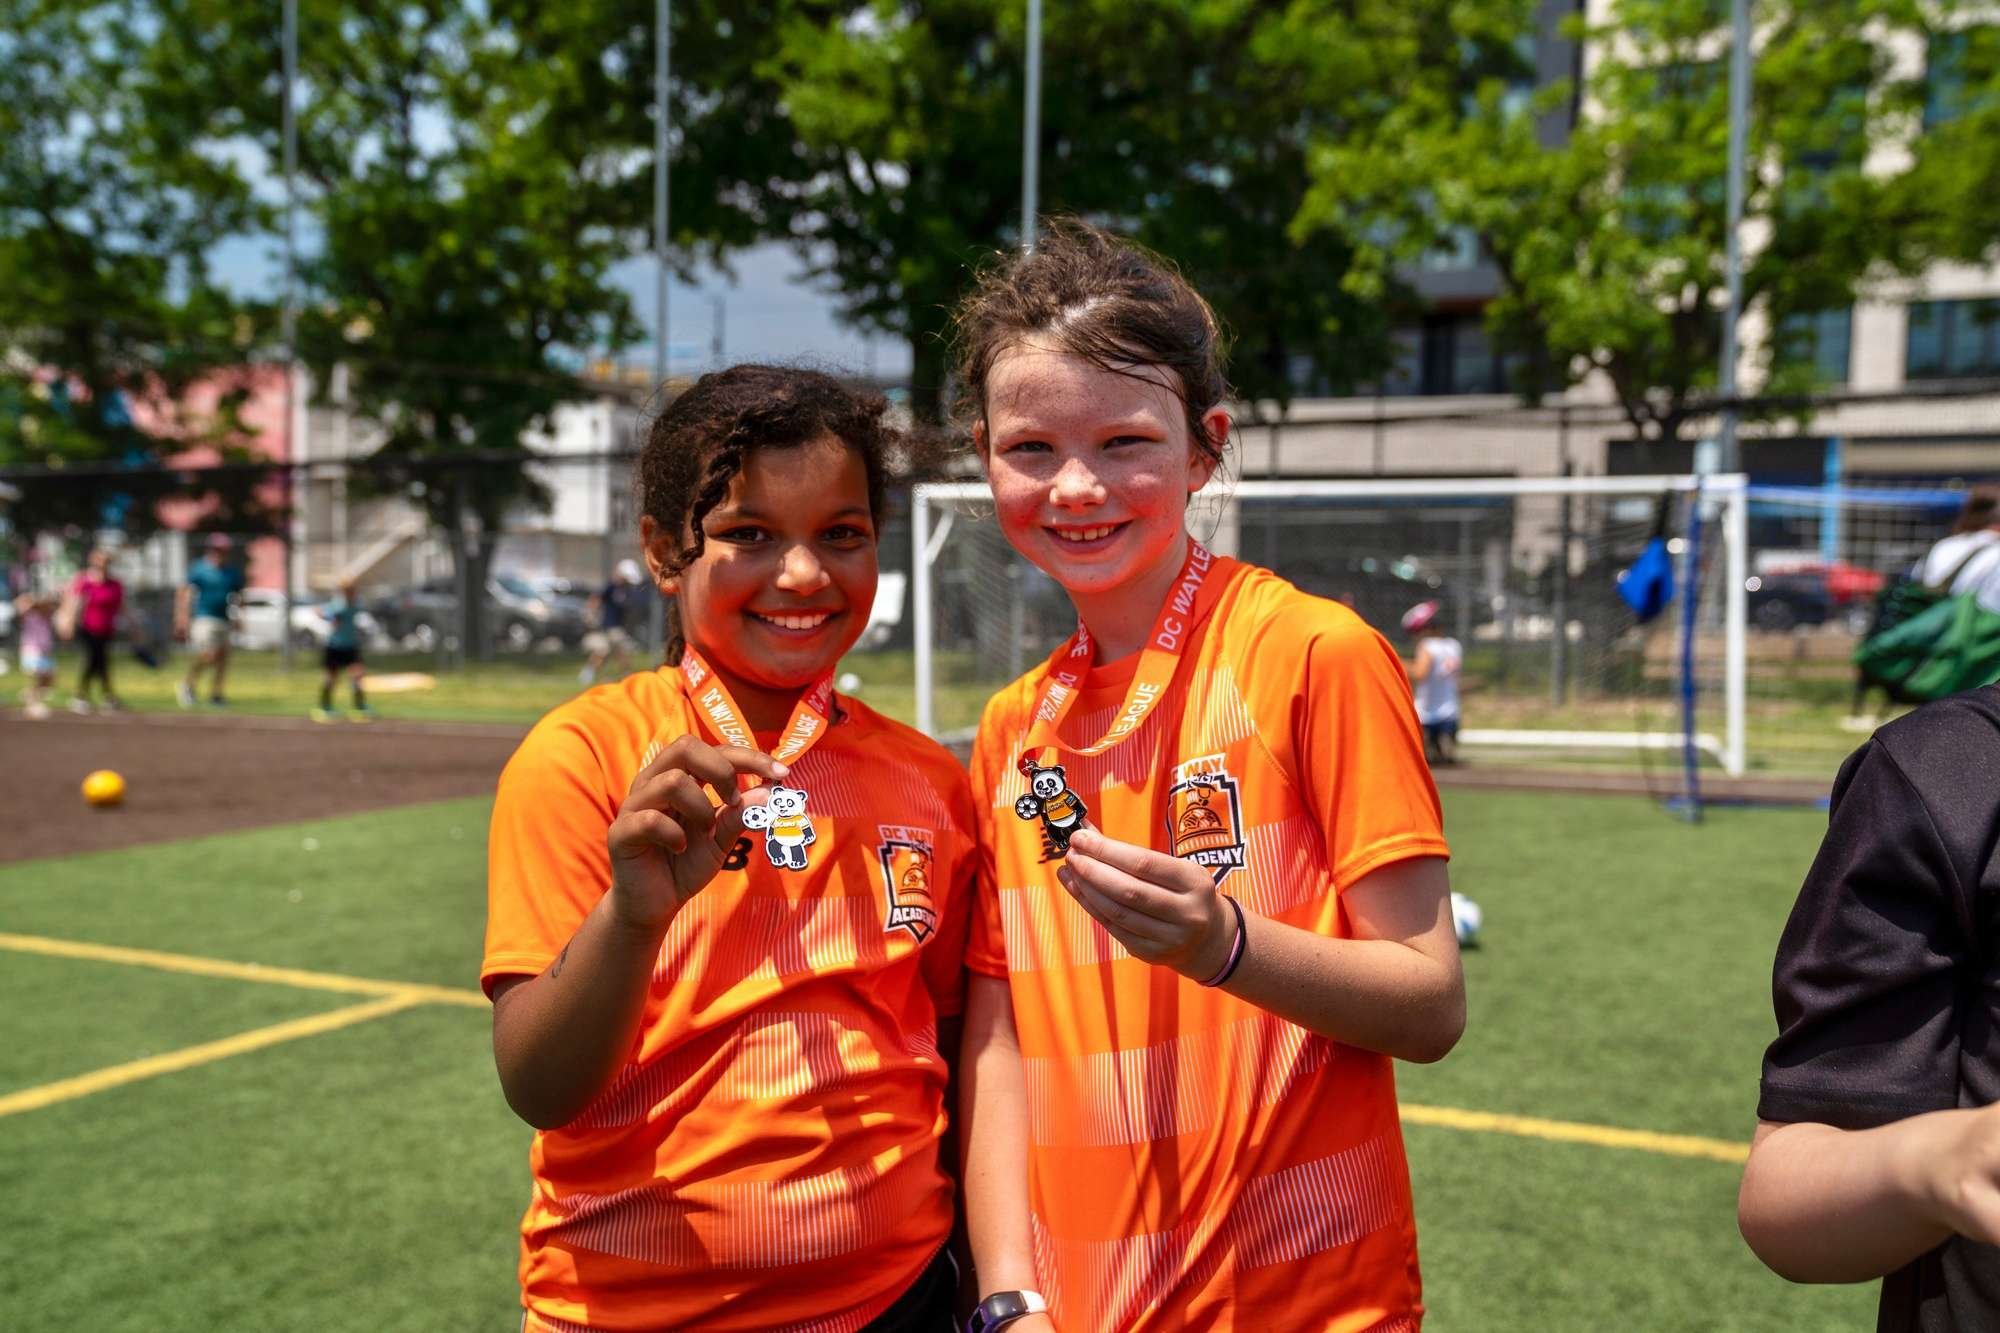 Dc-way-soccer-club-for-kids-in-washington-dc-capitol-hill-league-at-brentwood-hamilton-park-06-03-2023 0204.jpg